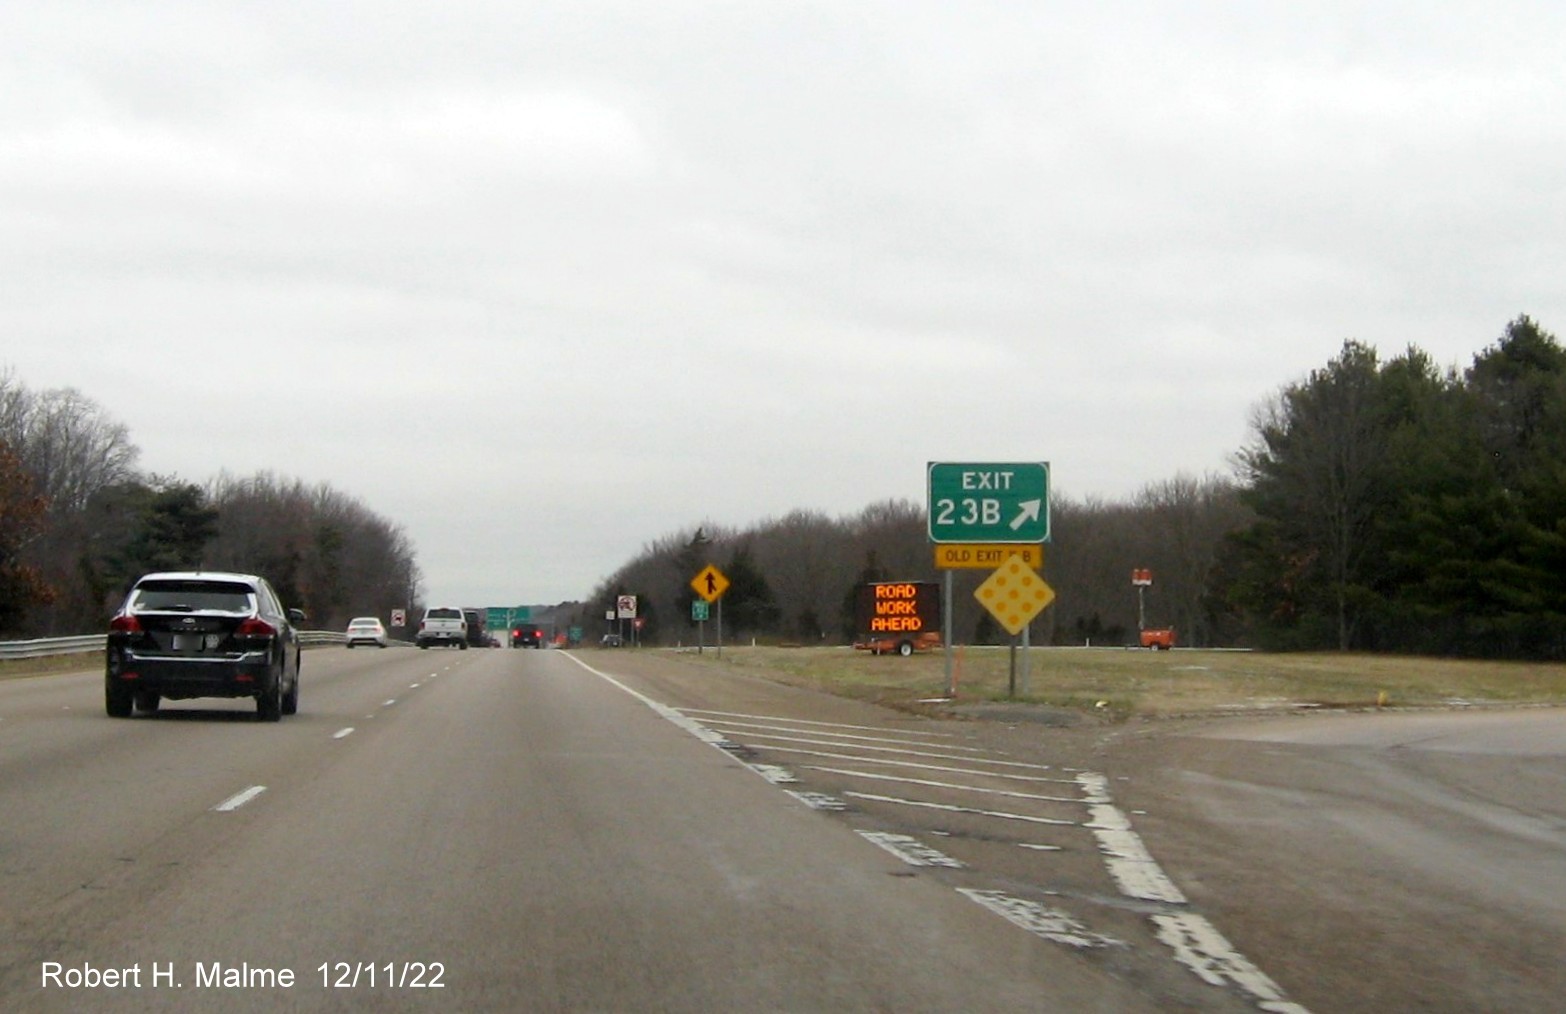 Image of recently placed gore sign for the Neponset Street west exit on I-95 North in Norwood, December 2022